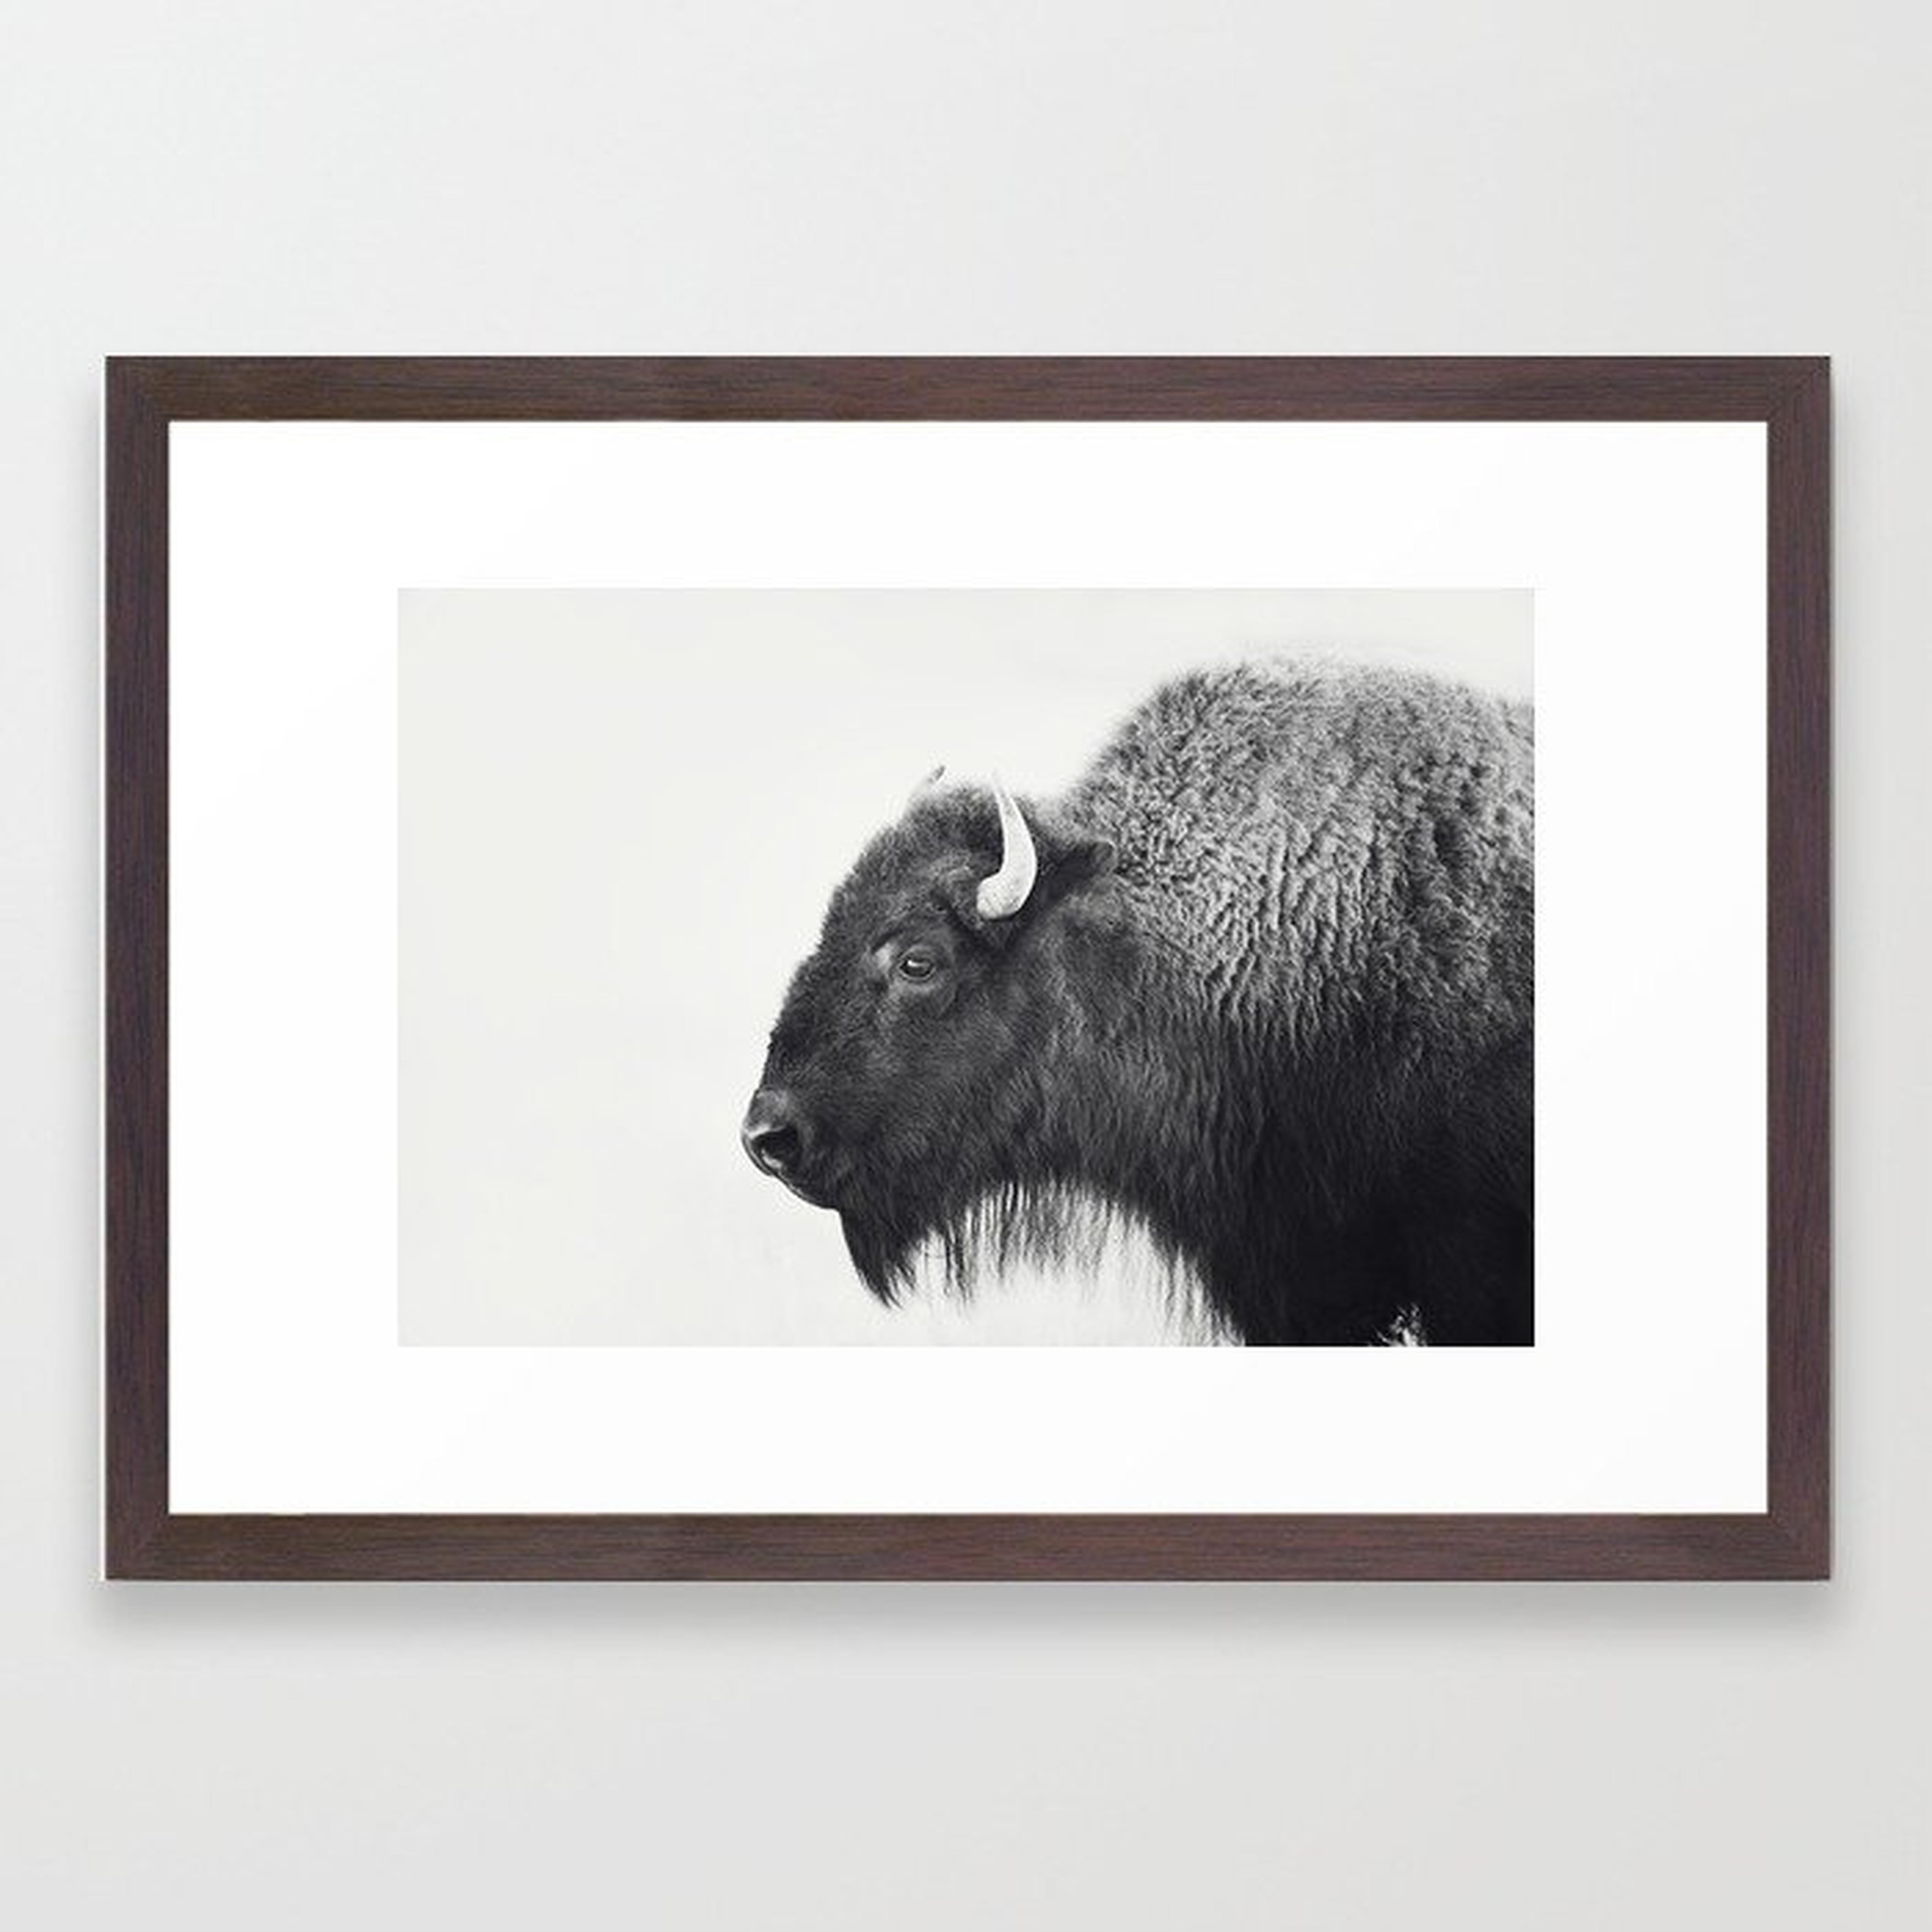 Buffalo Photograph in Black and White Framed Art Print - Society6